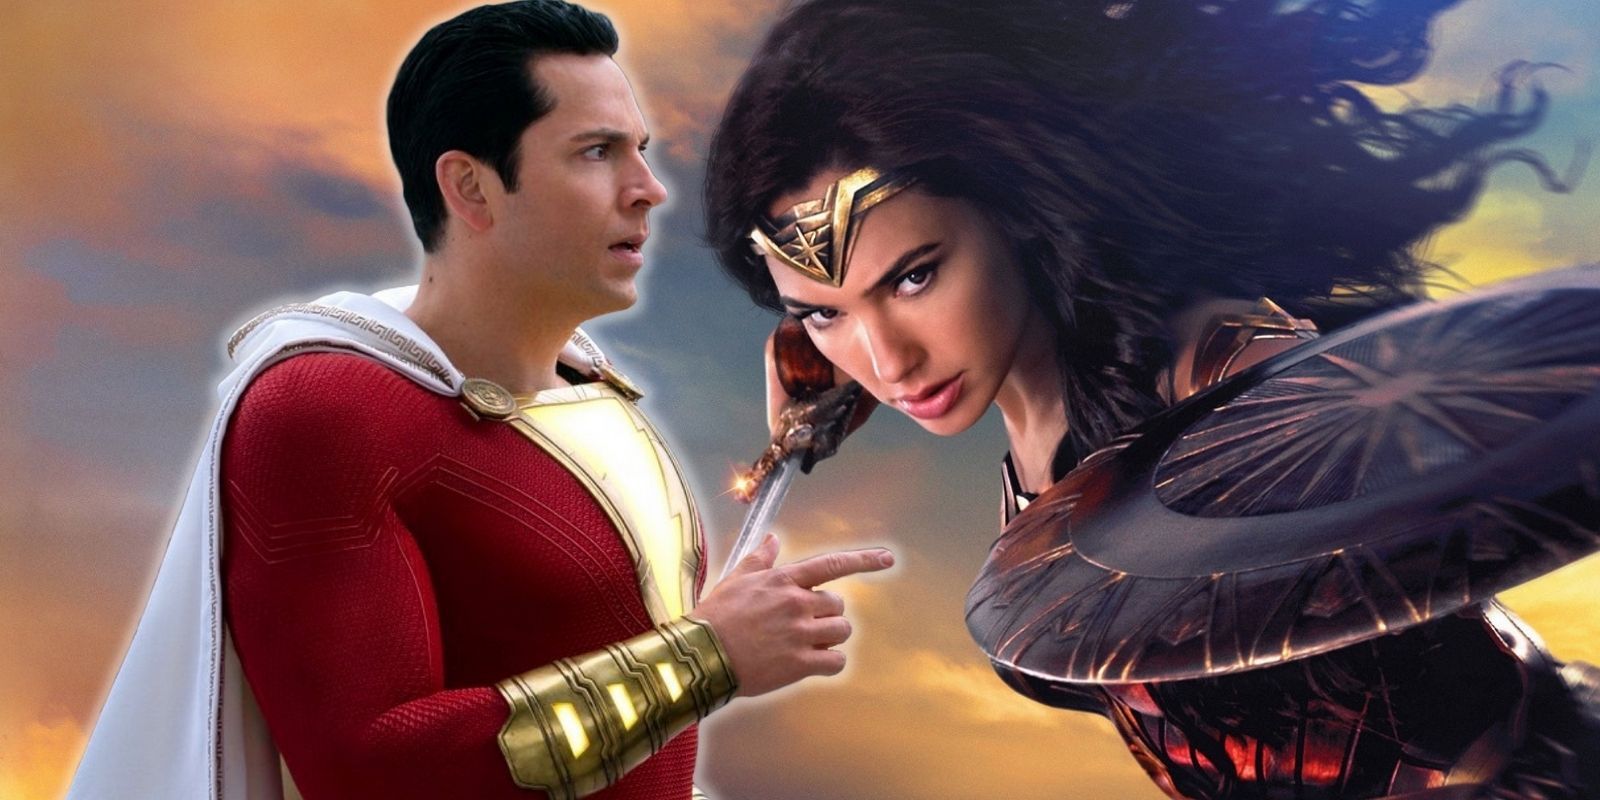 Wonder Woman's Shazam 2 Cameo Is A Wild End To Gal Gadot's Time In